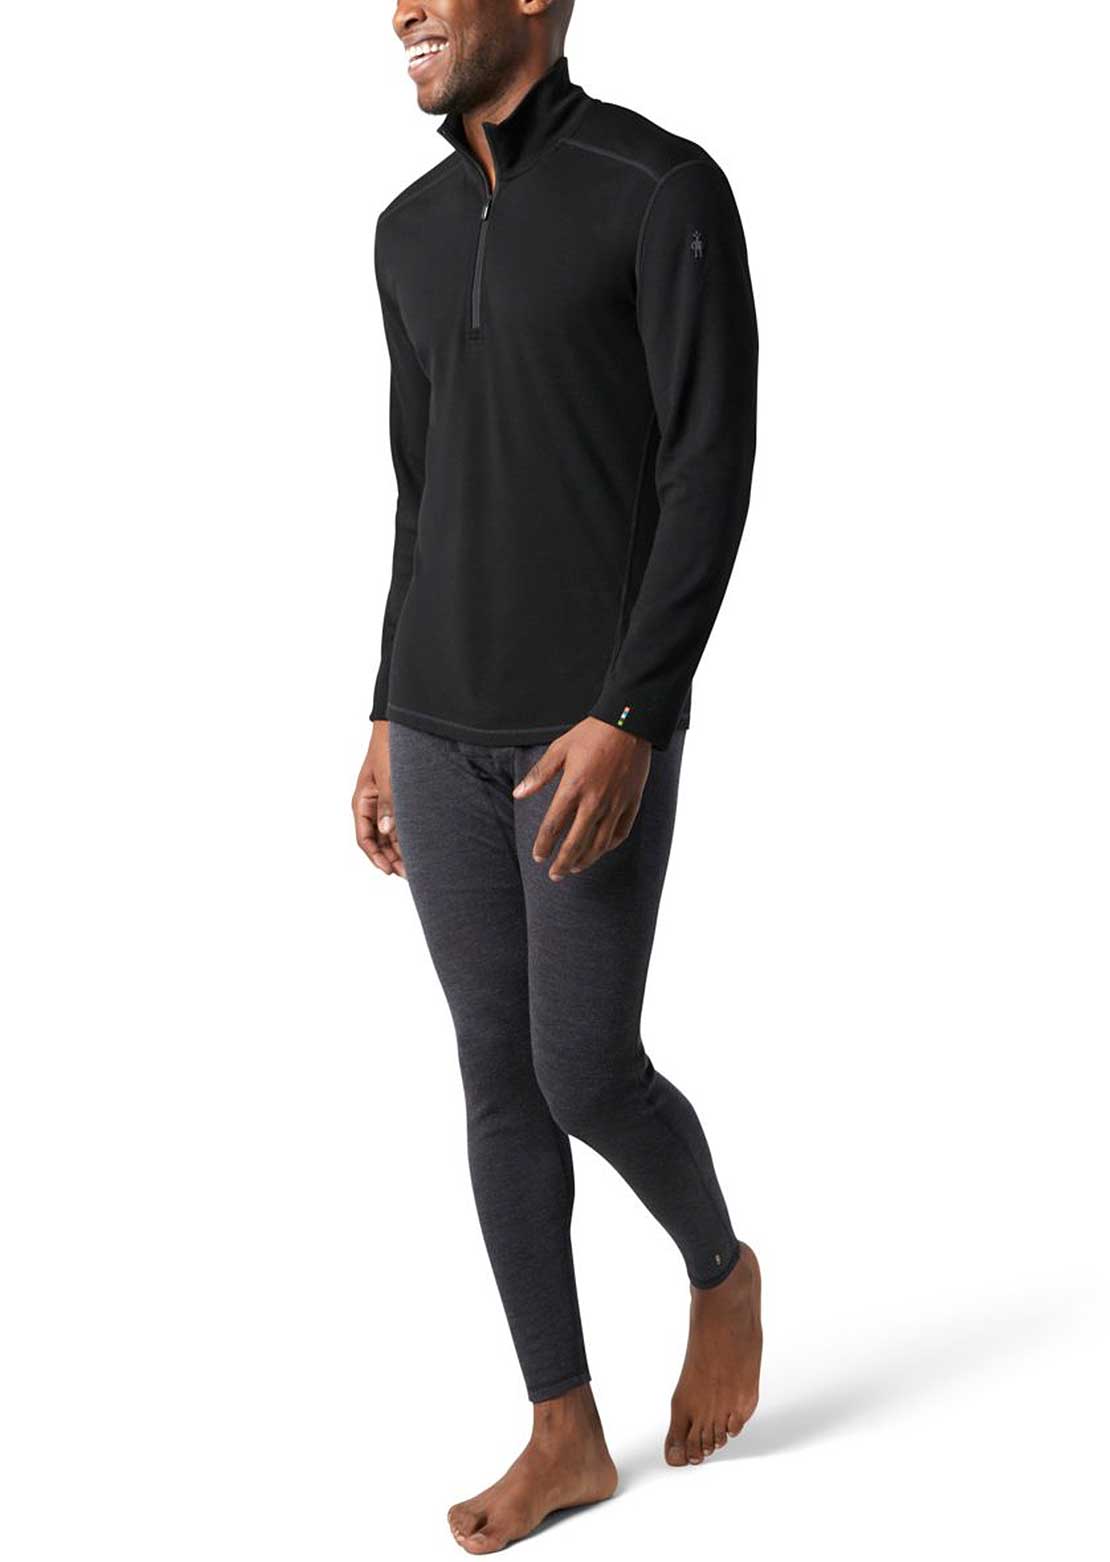 UNDER ARMOUR Cold Gear Classic Base Layer Tight Leggings Women's